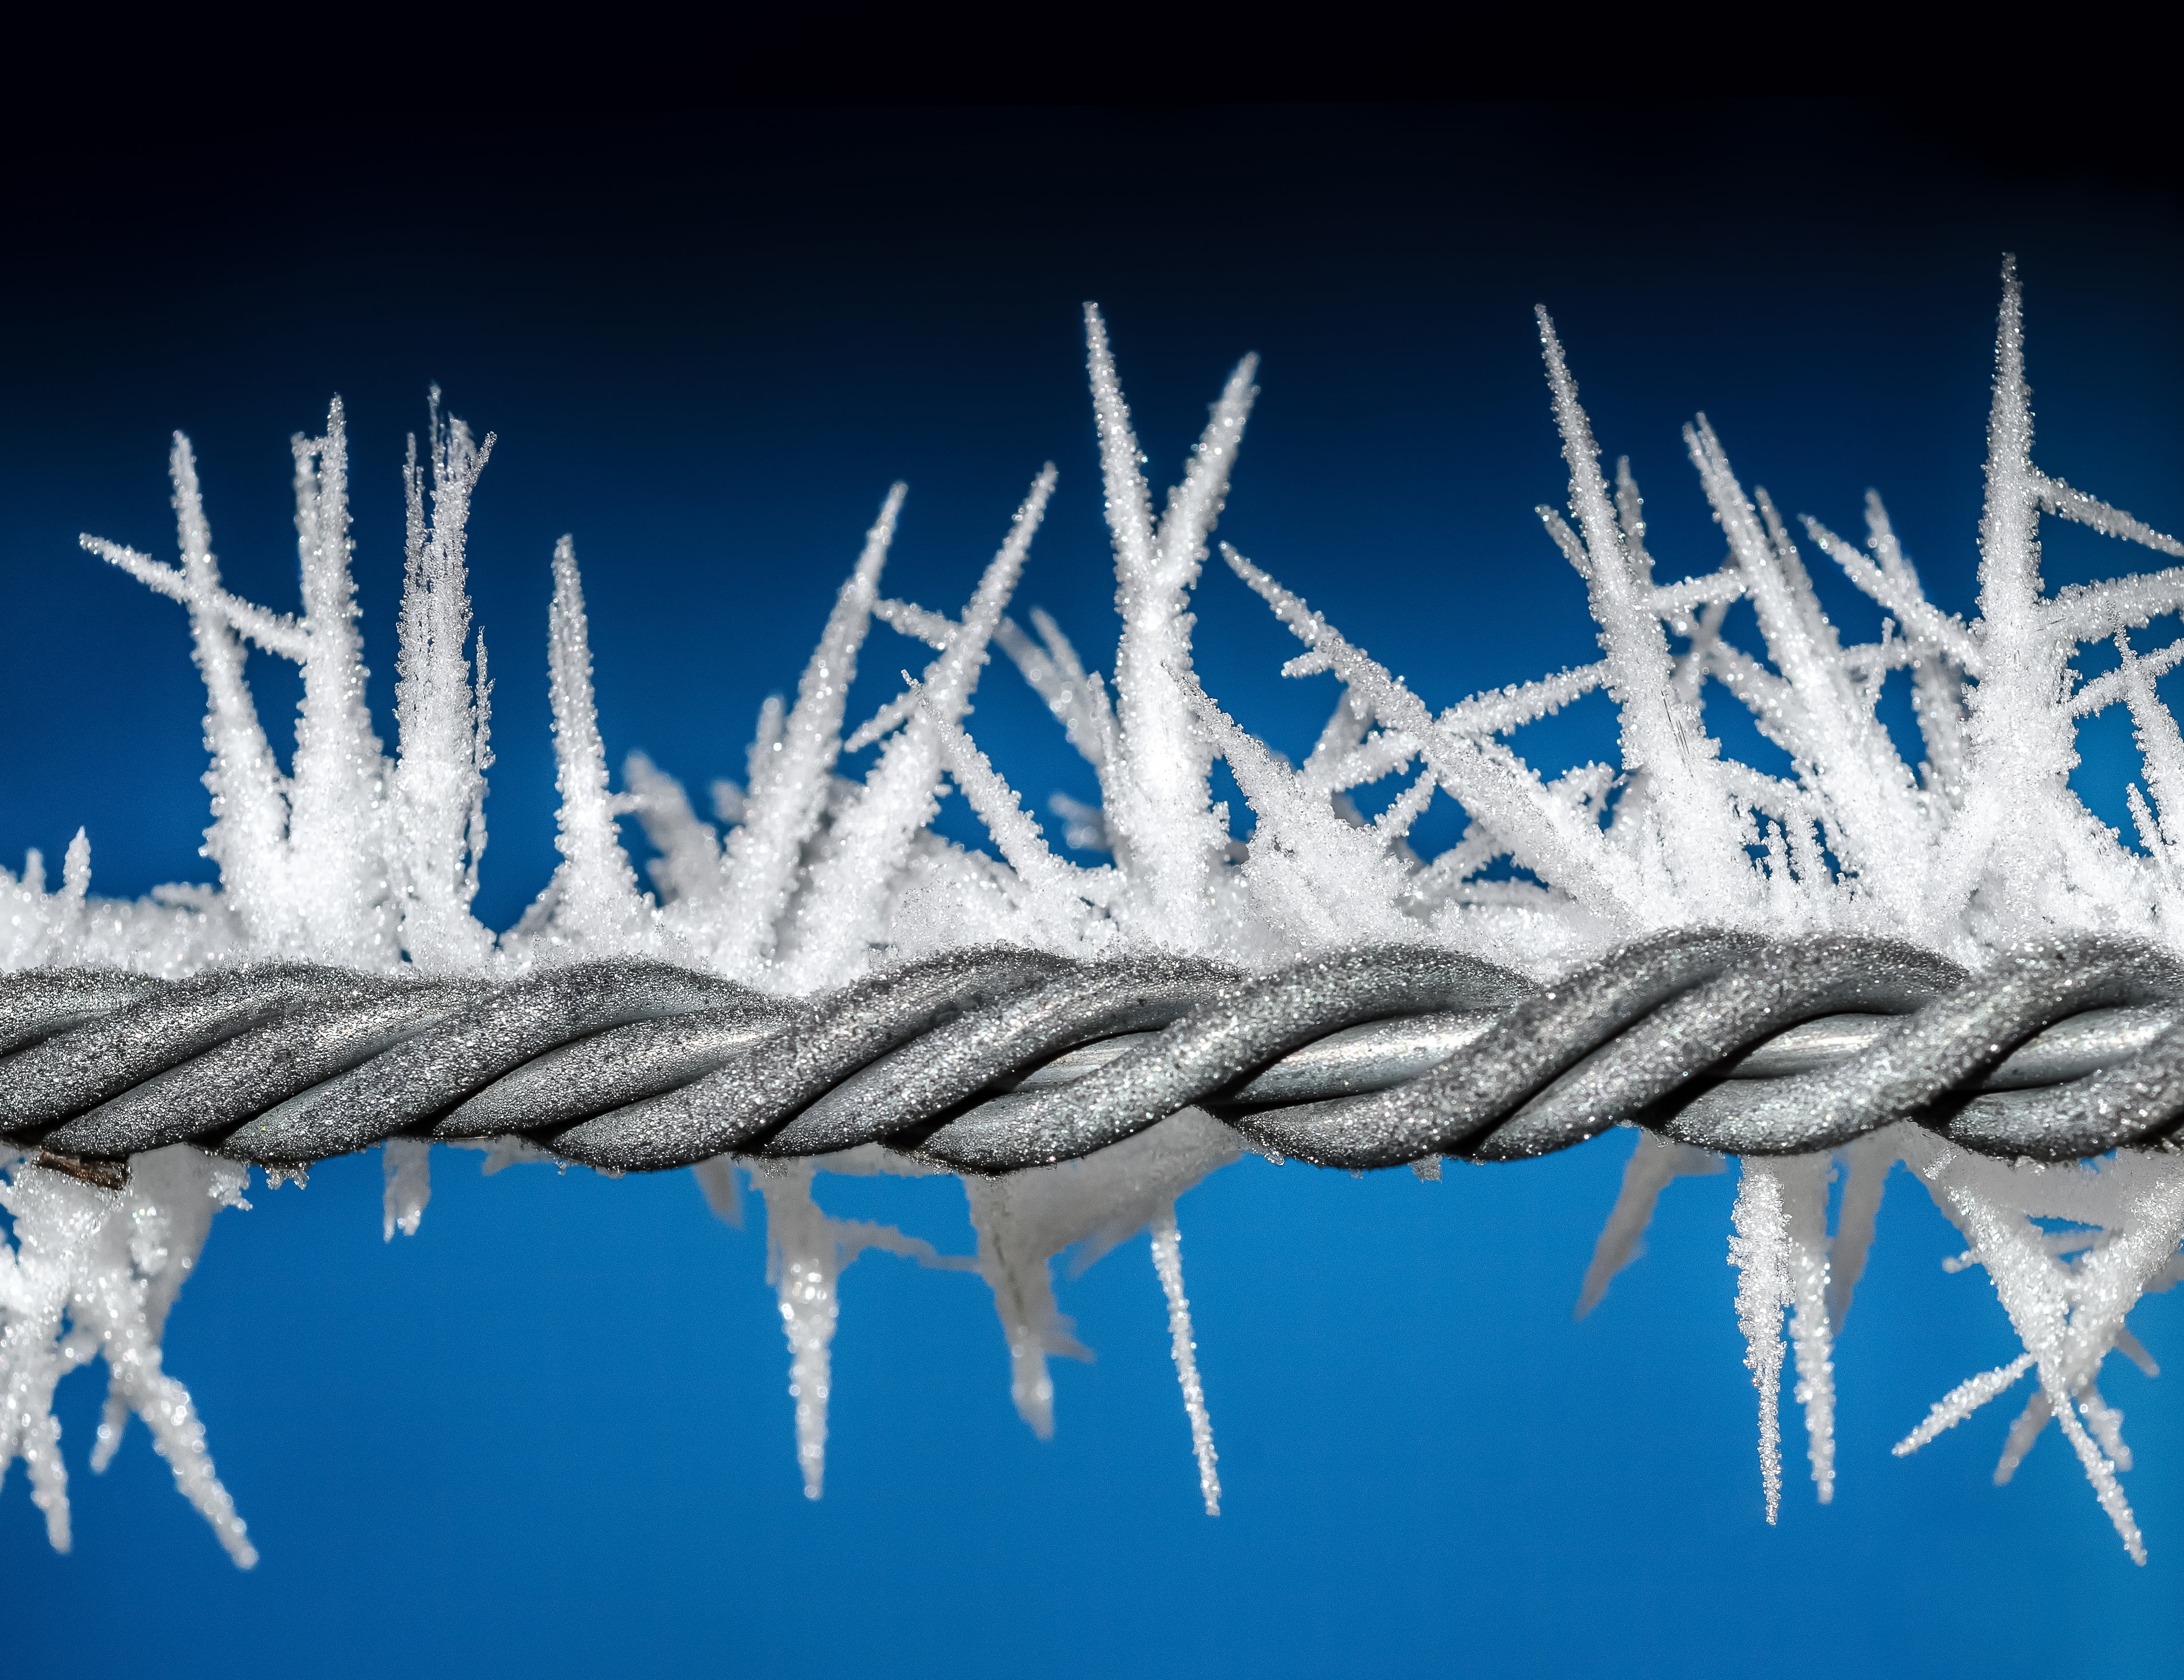 Frosted Barb Wire Closeup Hd Wallpaper - Metal In Winter , HD Wallpaper & Backgrounds